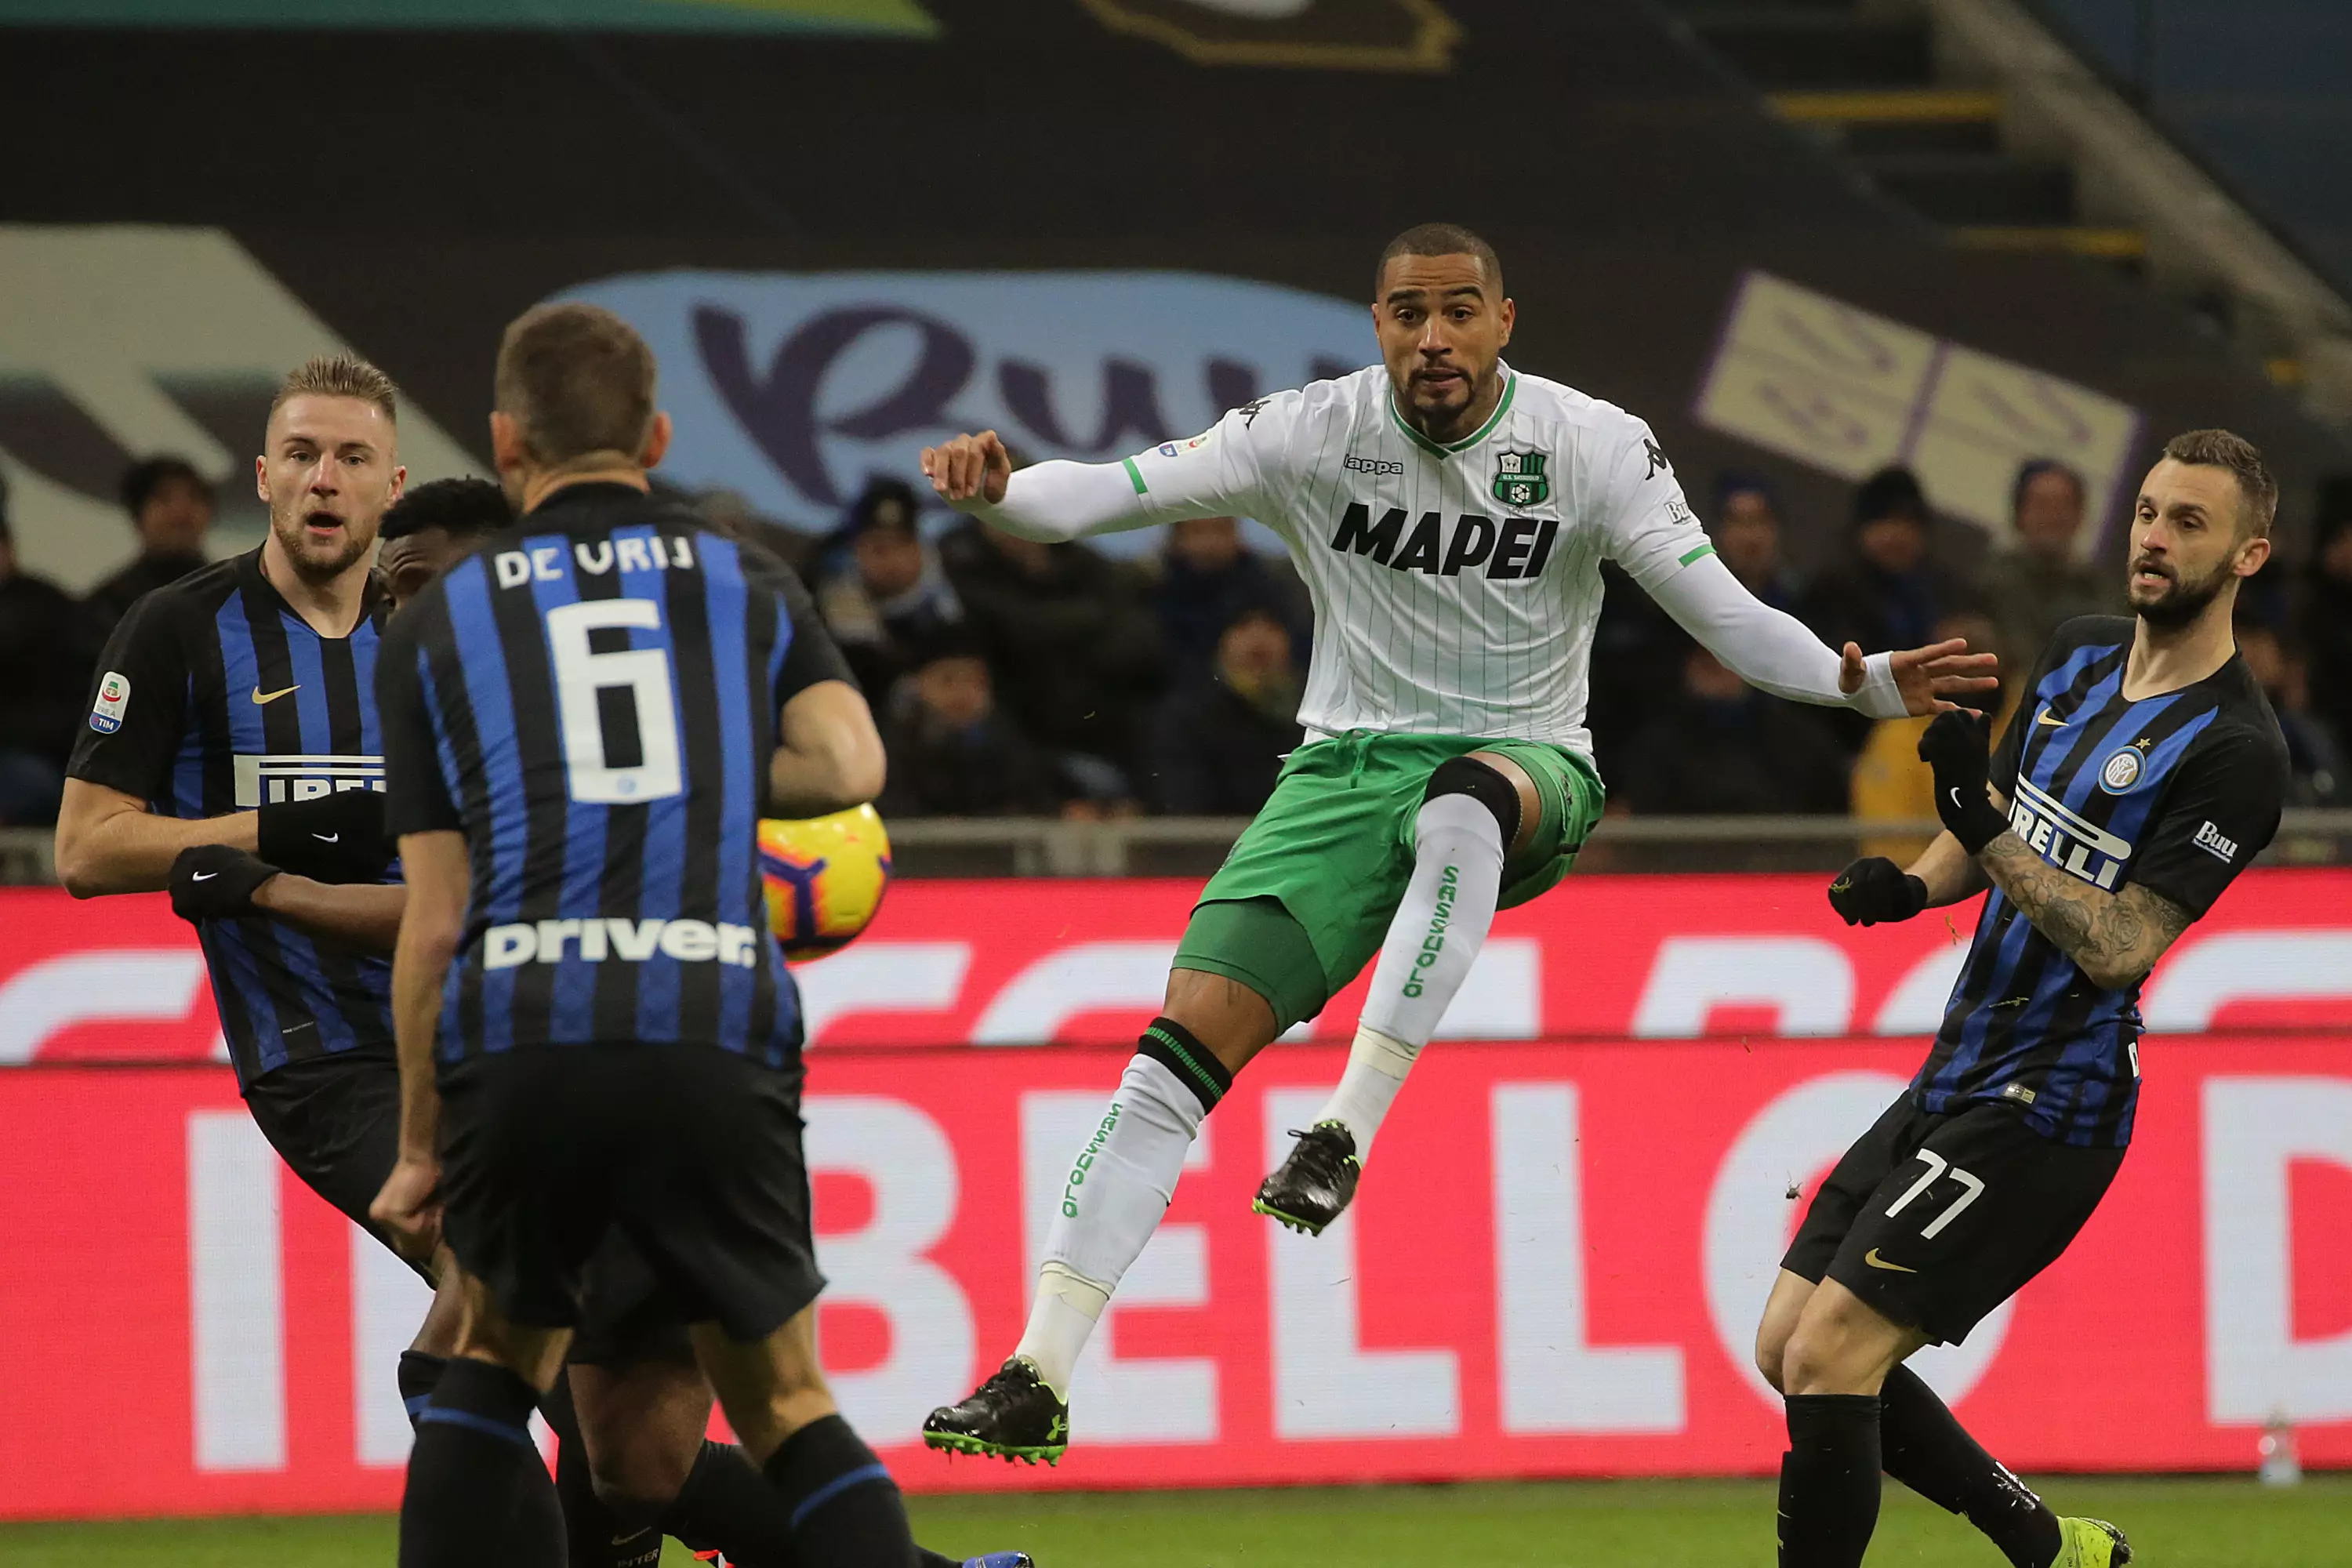 Boateng has been playing for Sassuolo. Image: PA Images